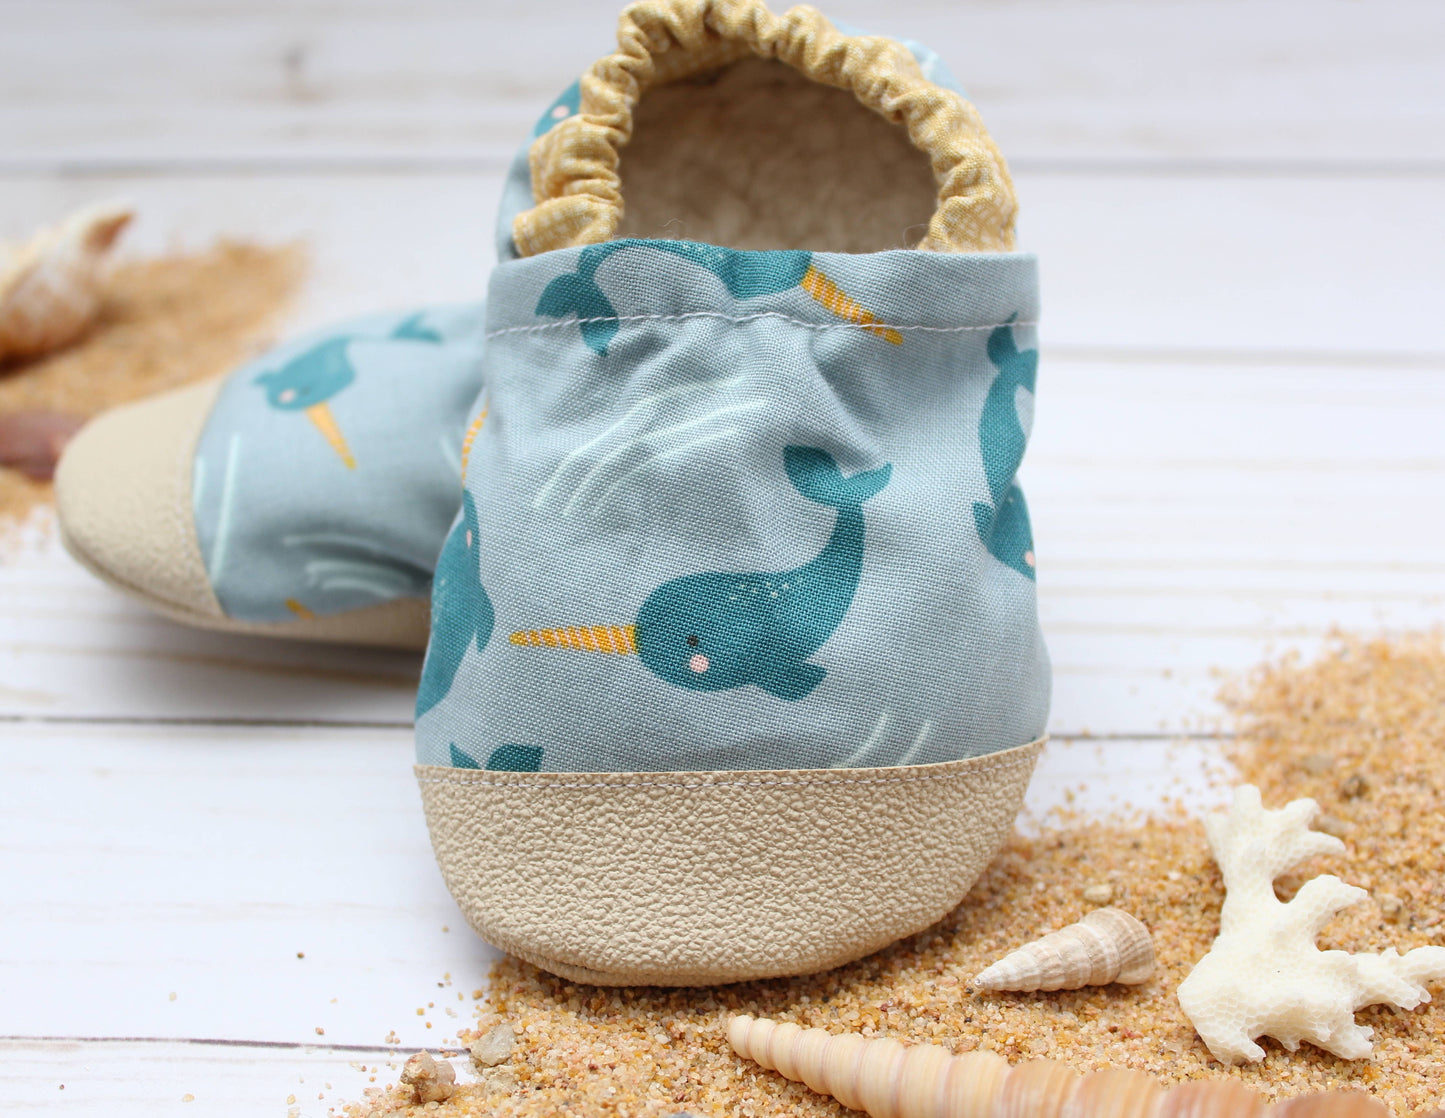 Scooter Booties - Narwhals Baby Shoes: 12 - 18 months